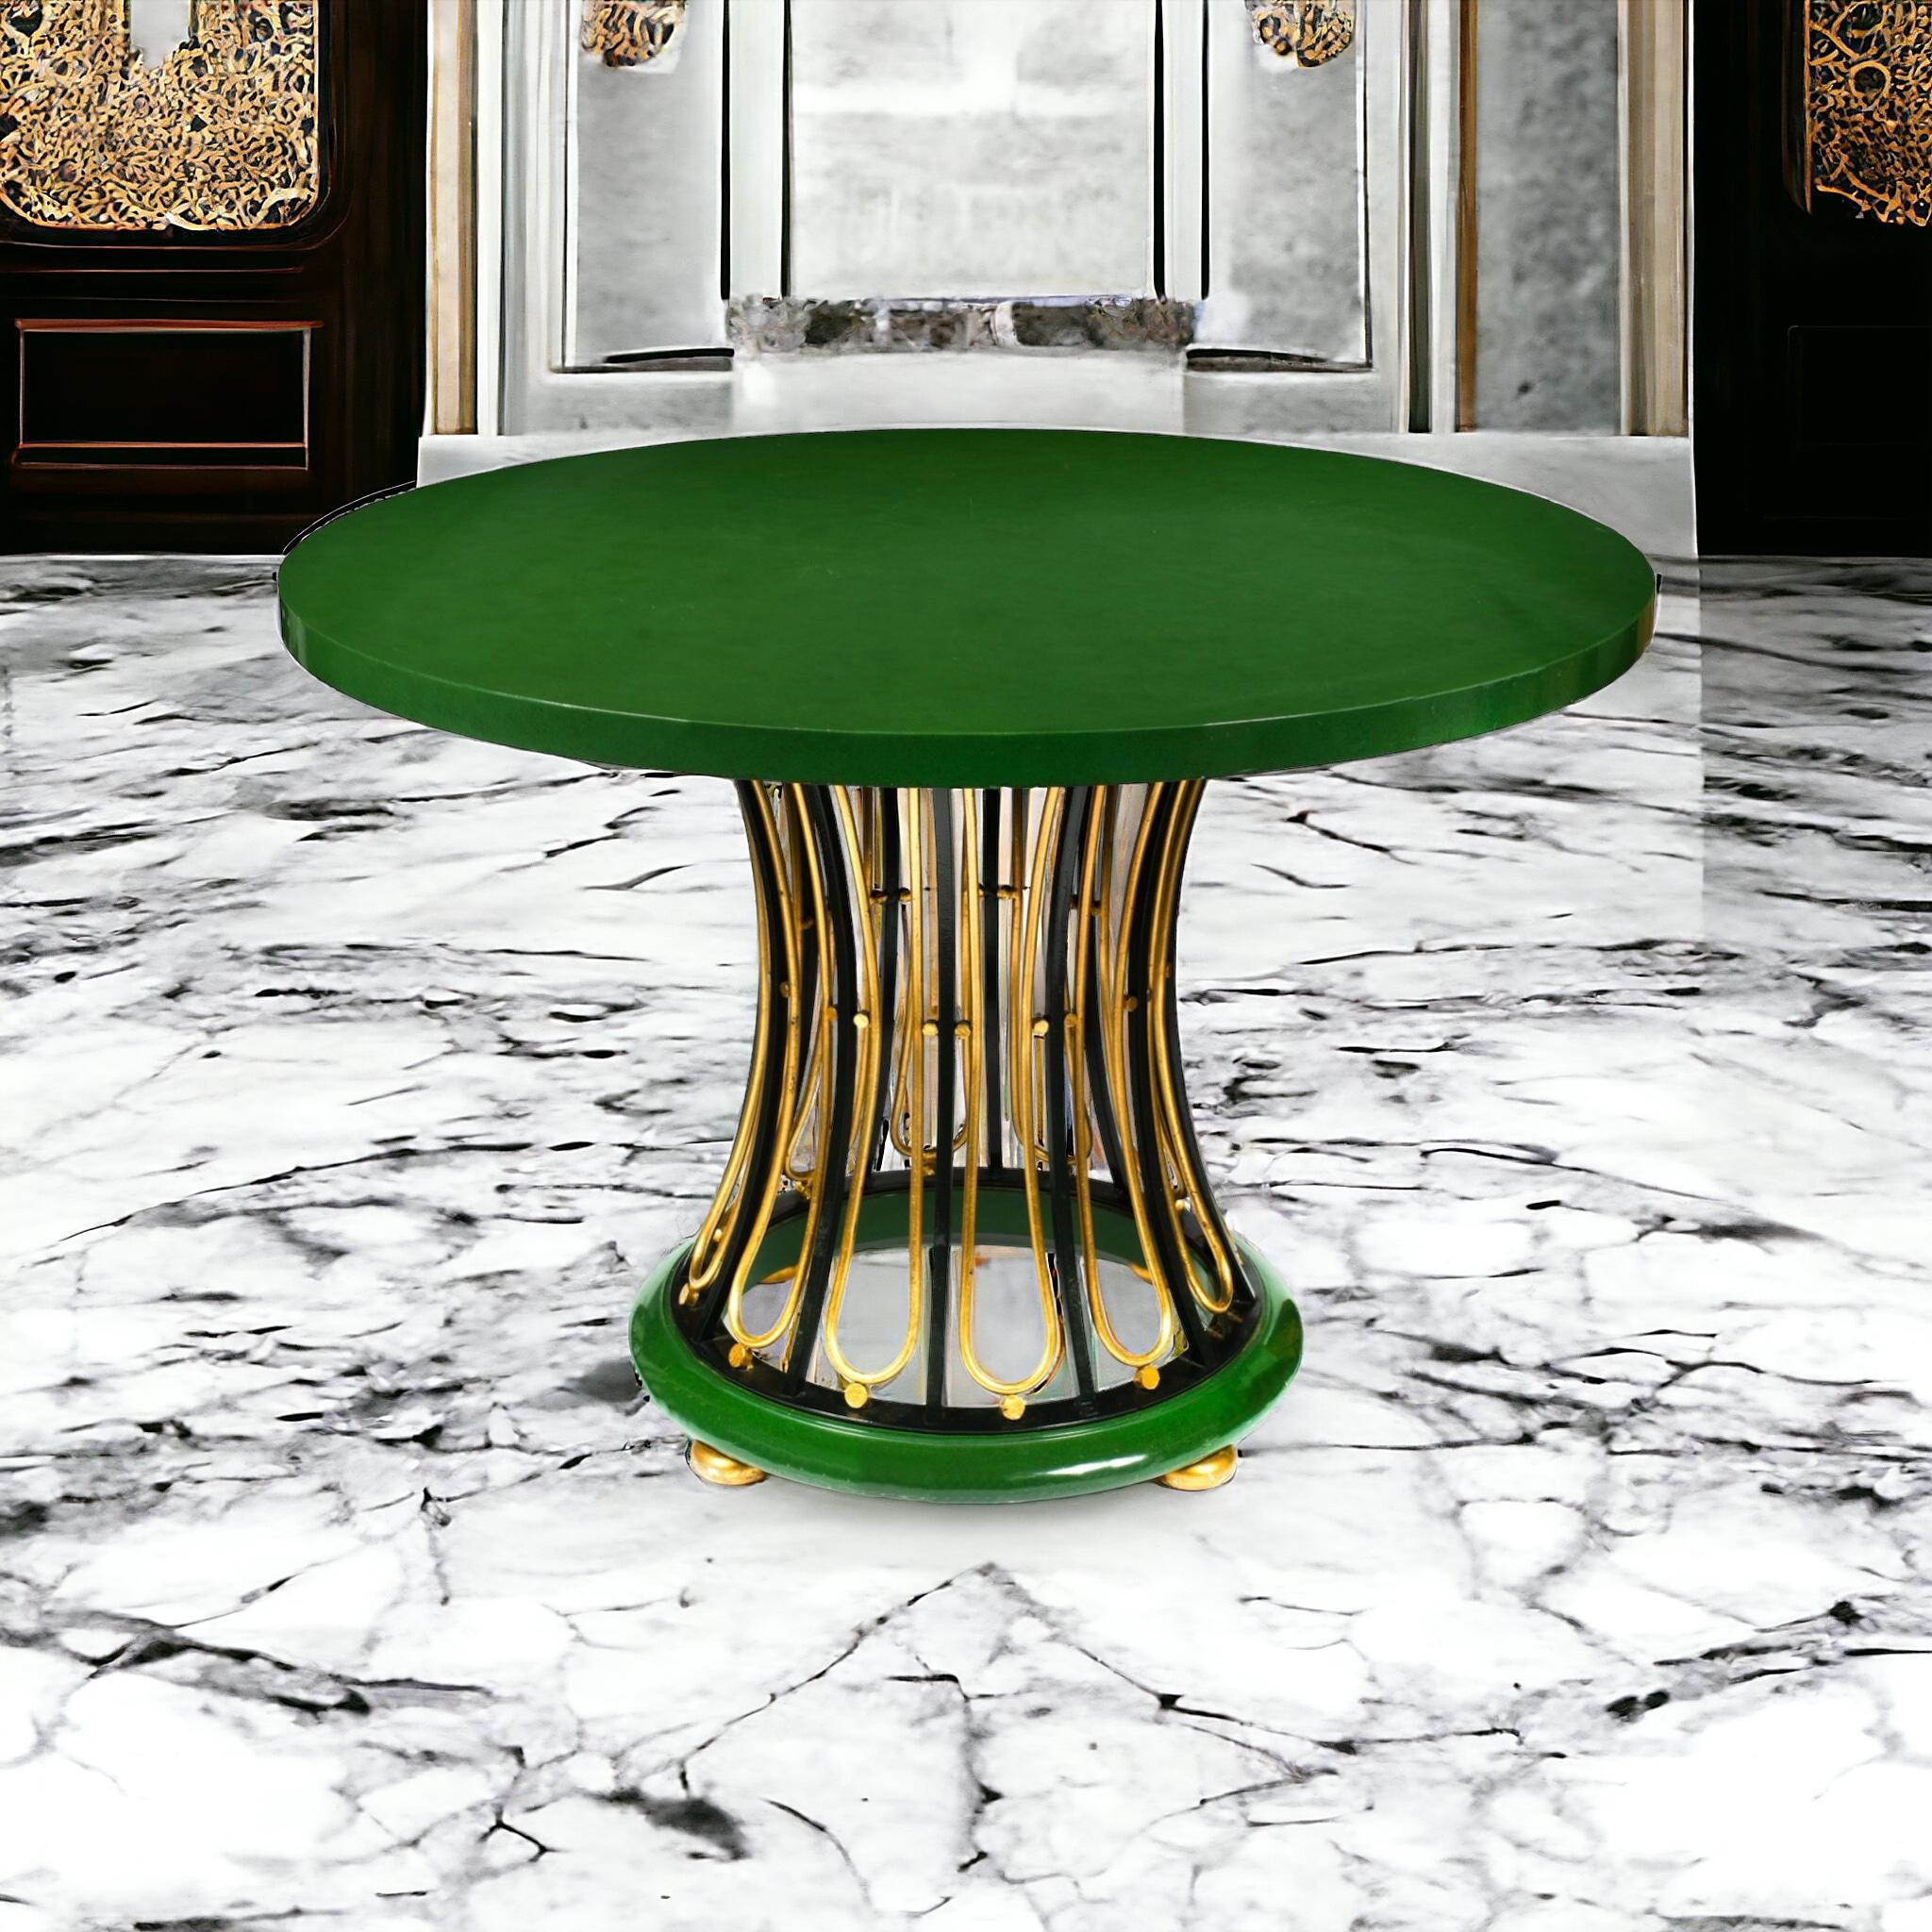 This is a show stopper! This is a modern interpretation of a regency table. The top is a green lacquered wood resting upon a woven gilt metal base and gilded bun feet. It is by Baker Furniture Company. 

